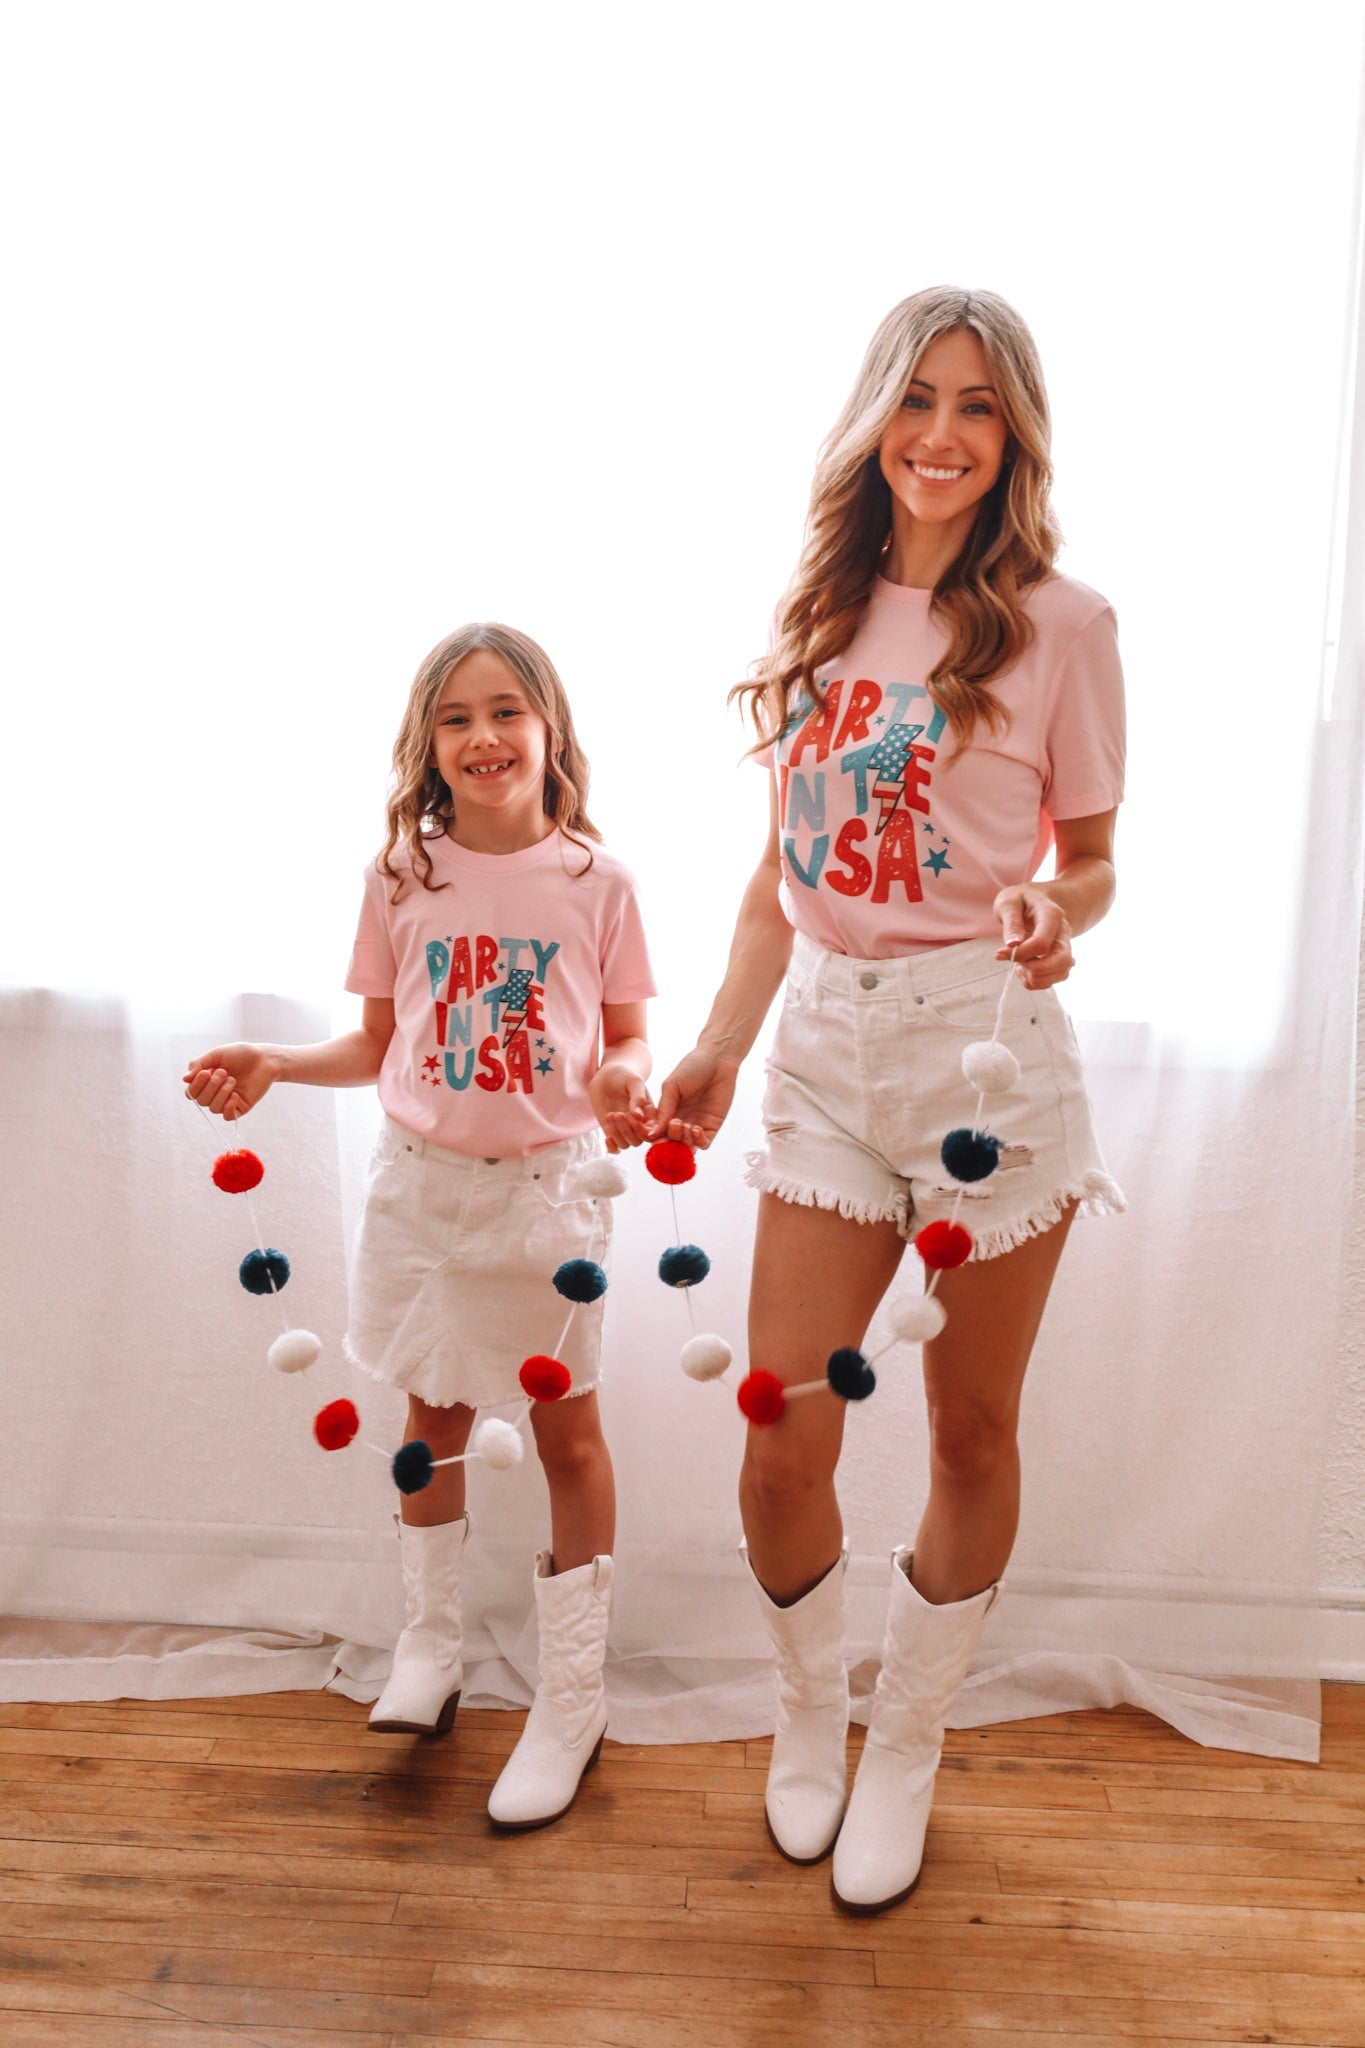 Pink Party in the USA Matching Shirts - LITTLE MIA BELLA